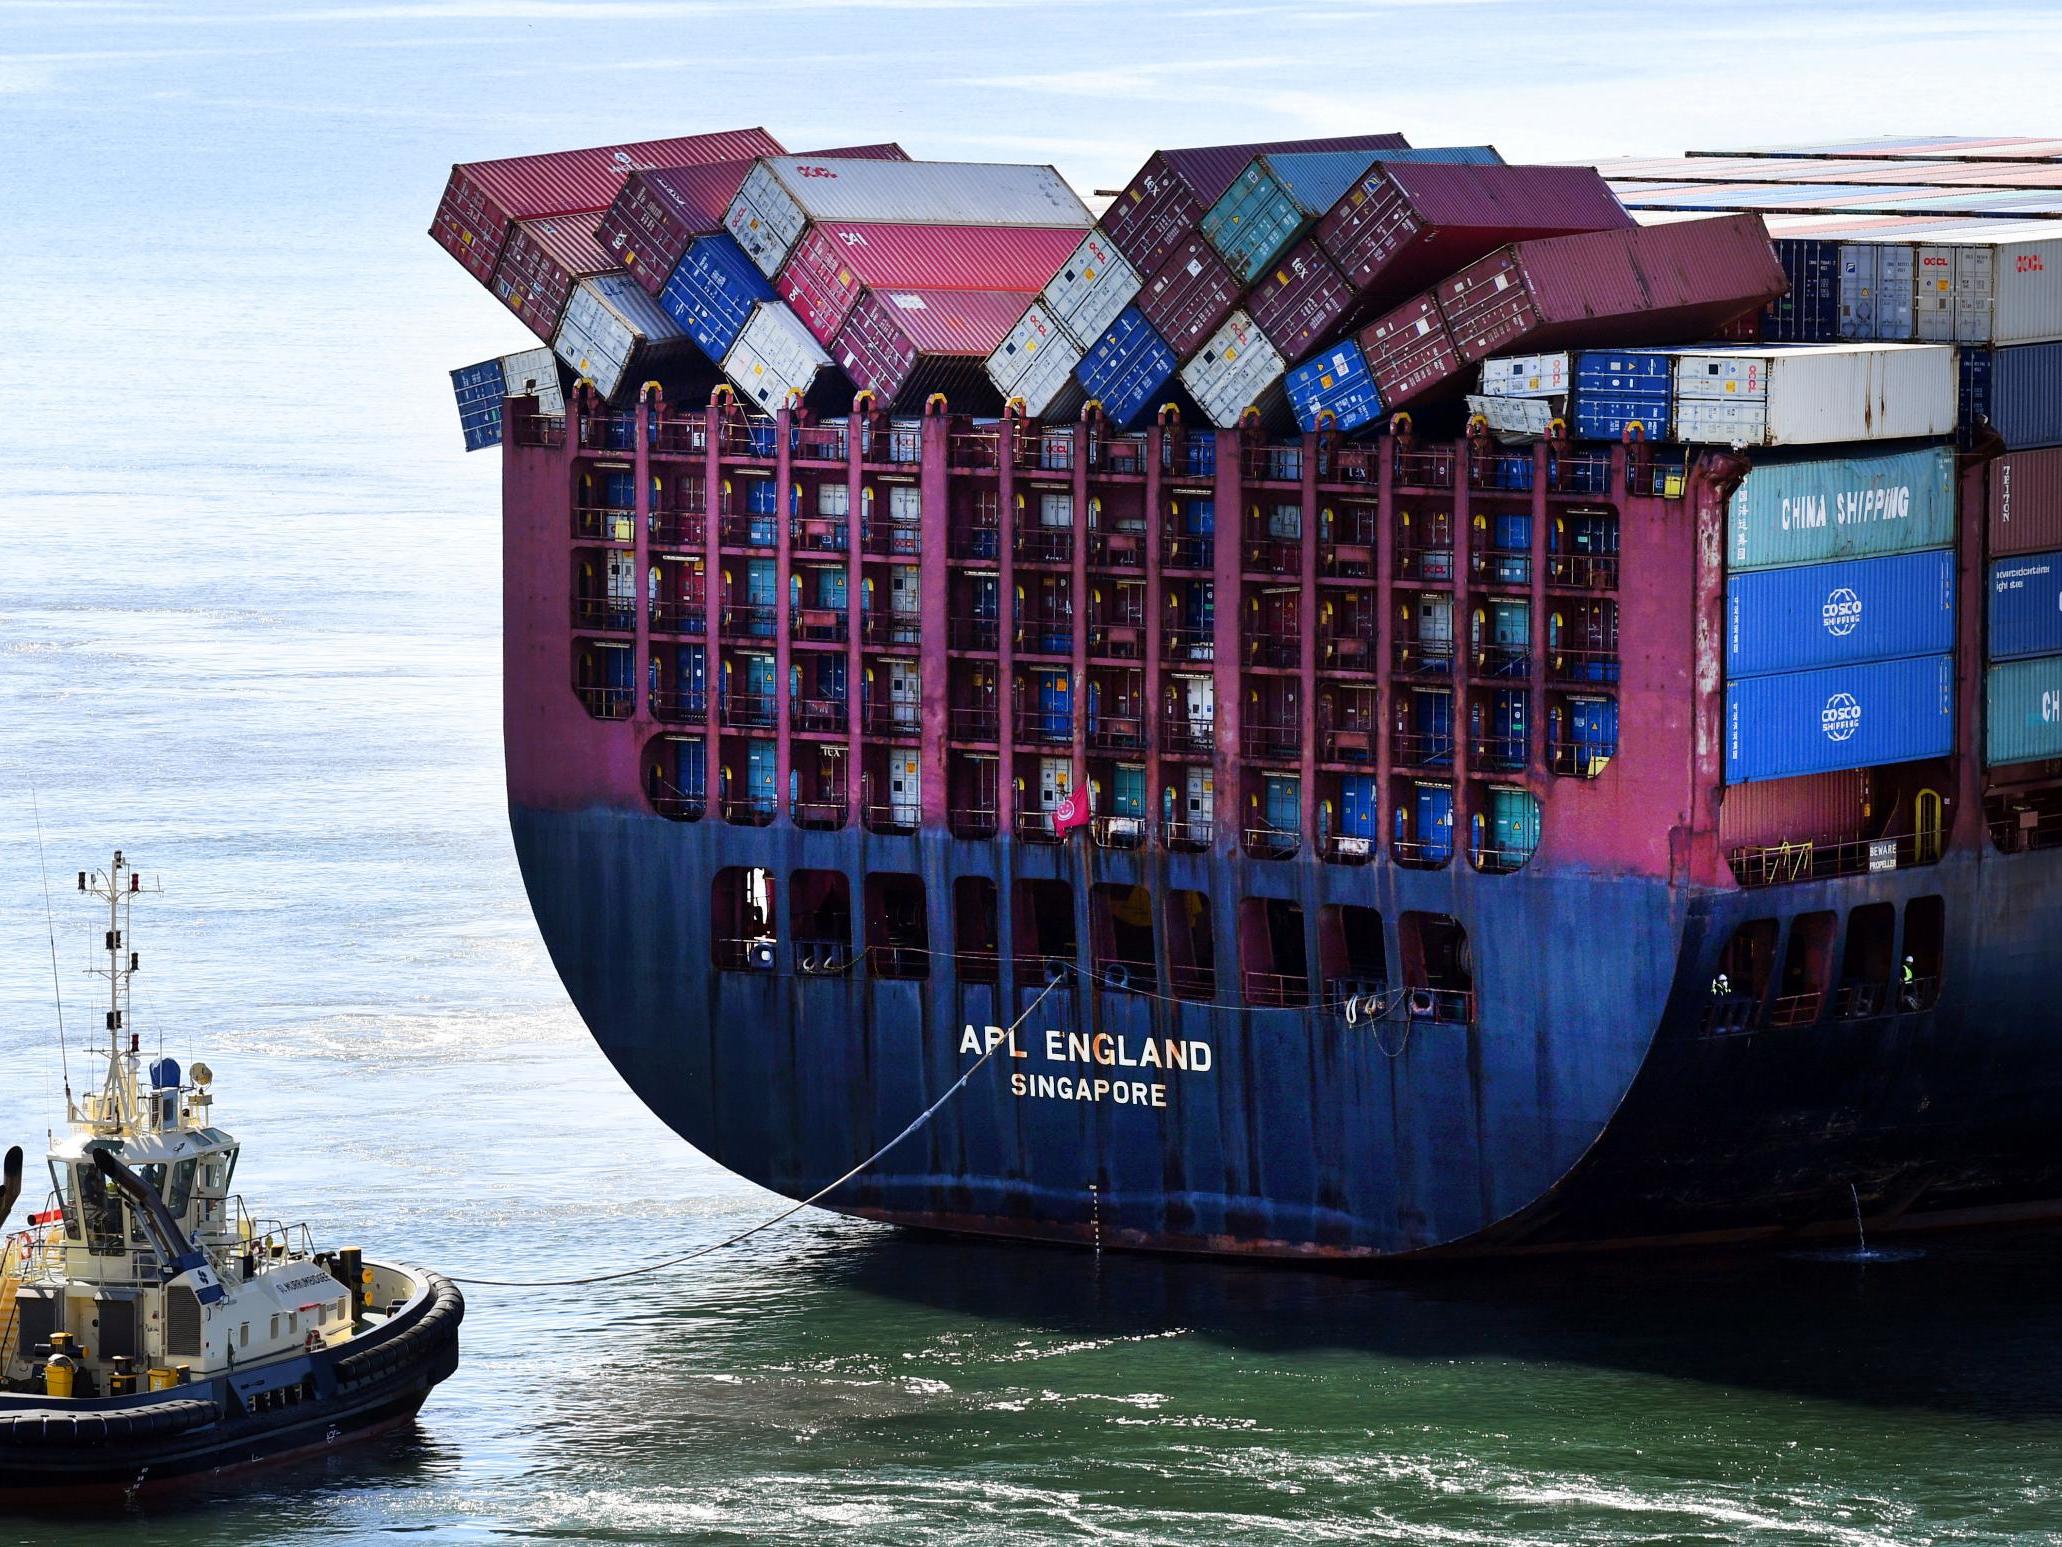 Fallen shipping containers are seen on the container ship APL England as it docks in Brisbane